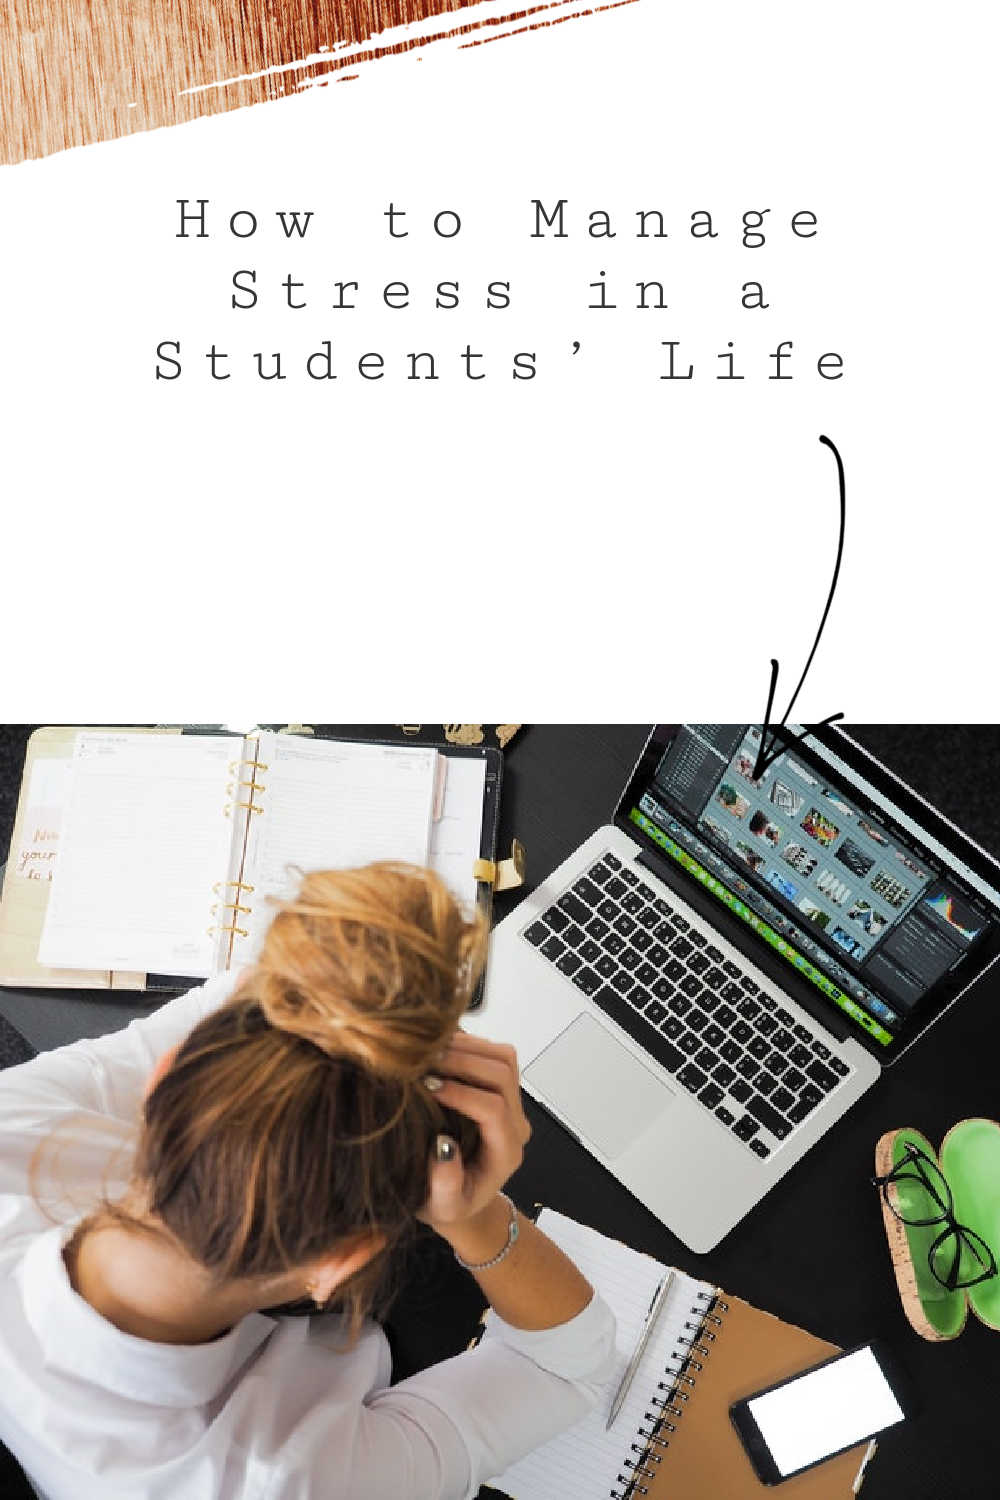 How to Manage Stress in a Students' Life